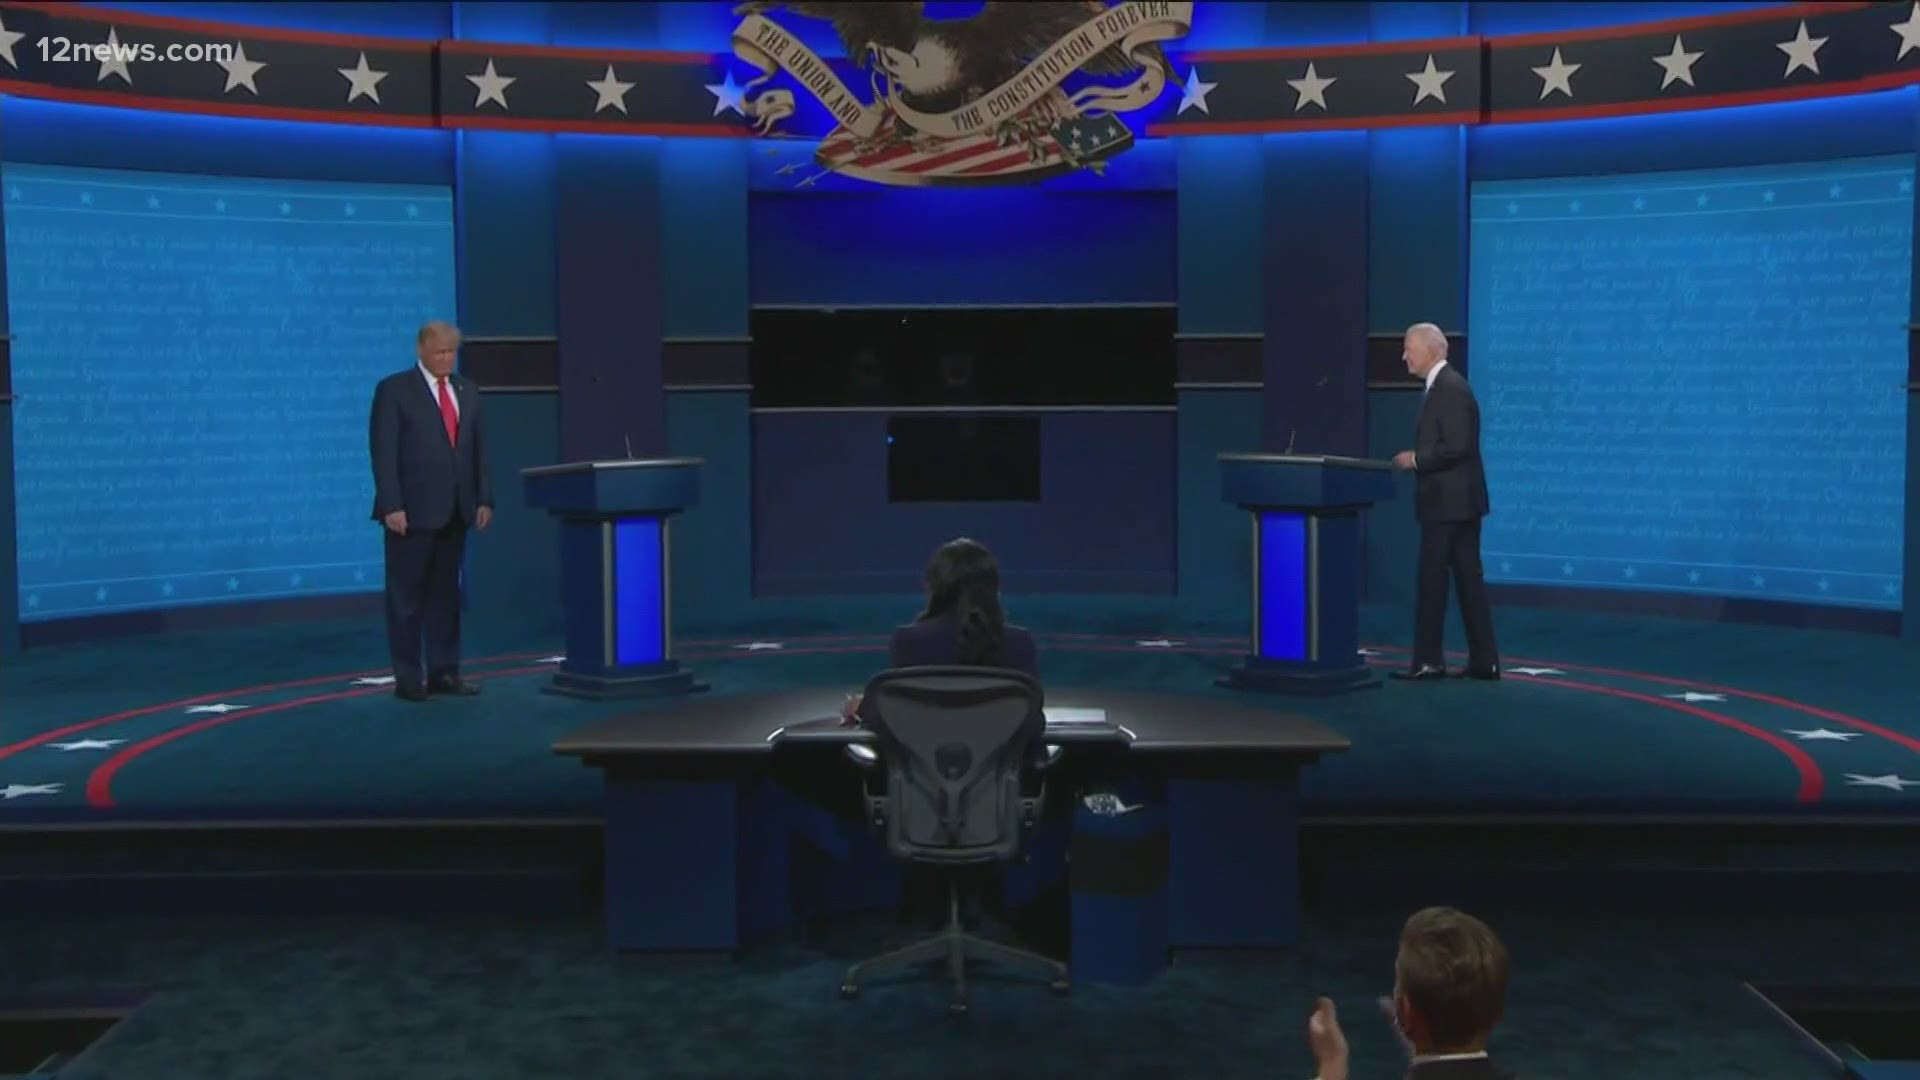 Body language expert Traci Brown says this debate revealed a calmer, controlled President Donald Trump. Joe Biden was less expressive but had less conviction.